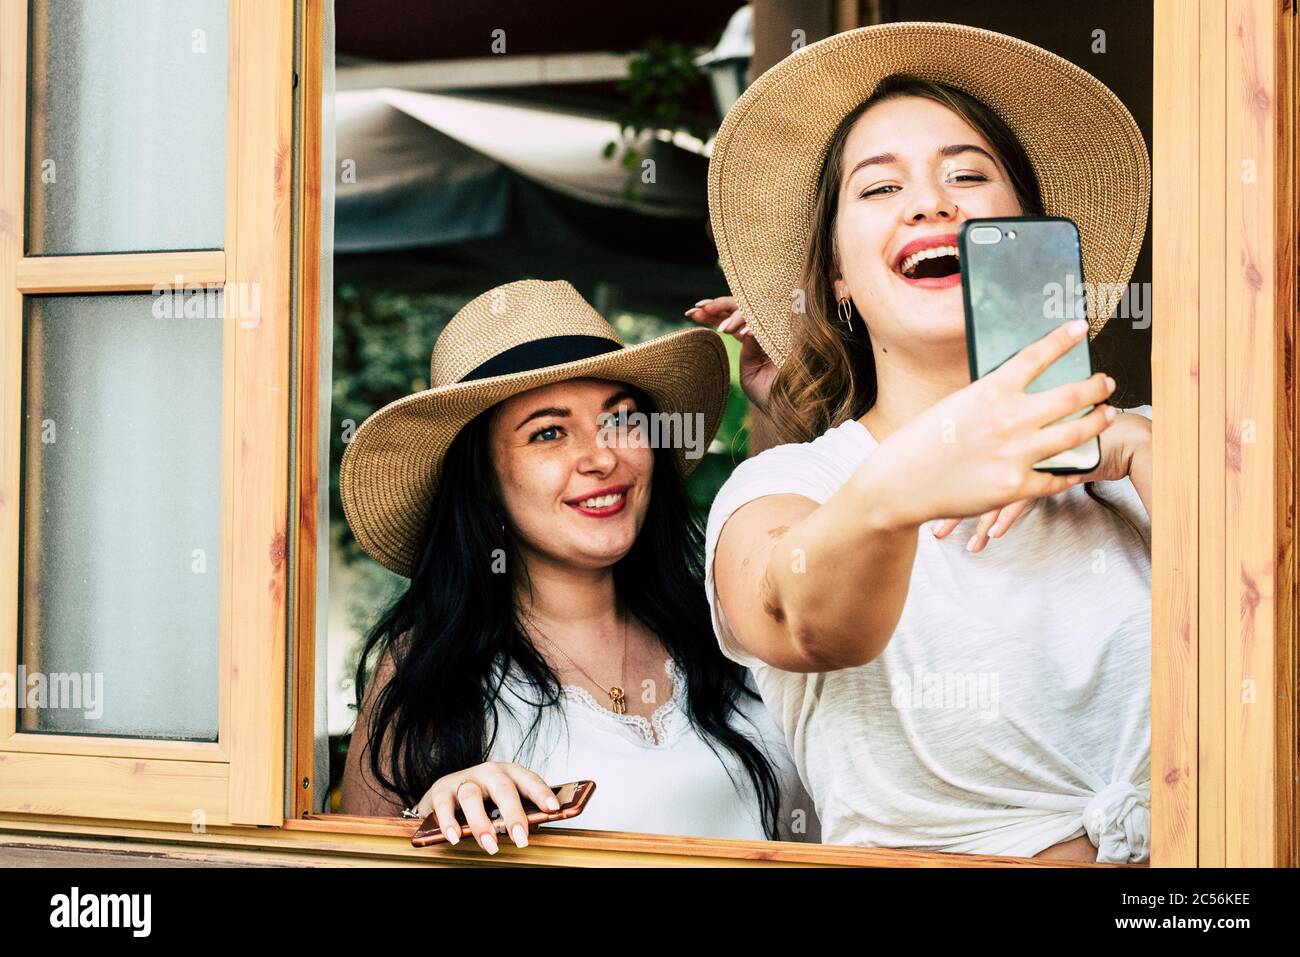 Pretty young curvy girls have lot of fun together in friendship taking selfie picture with modern big phone cellular to share on social media - infleu Stock Photo